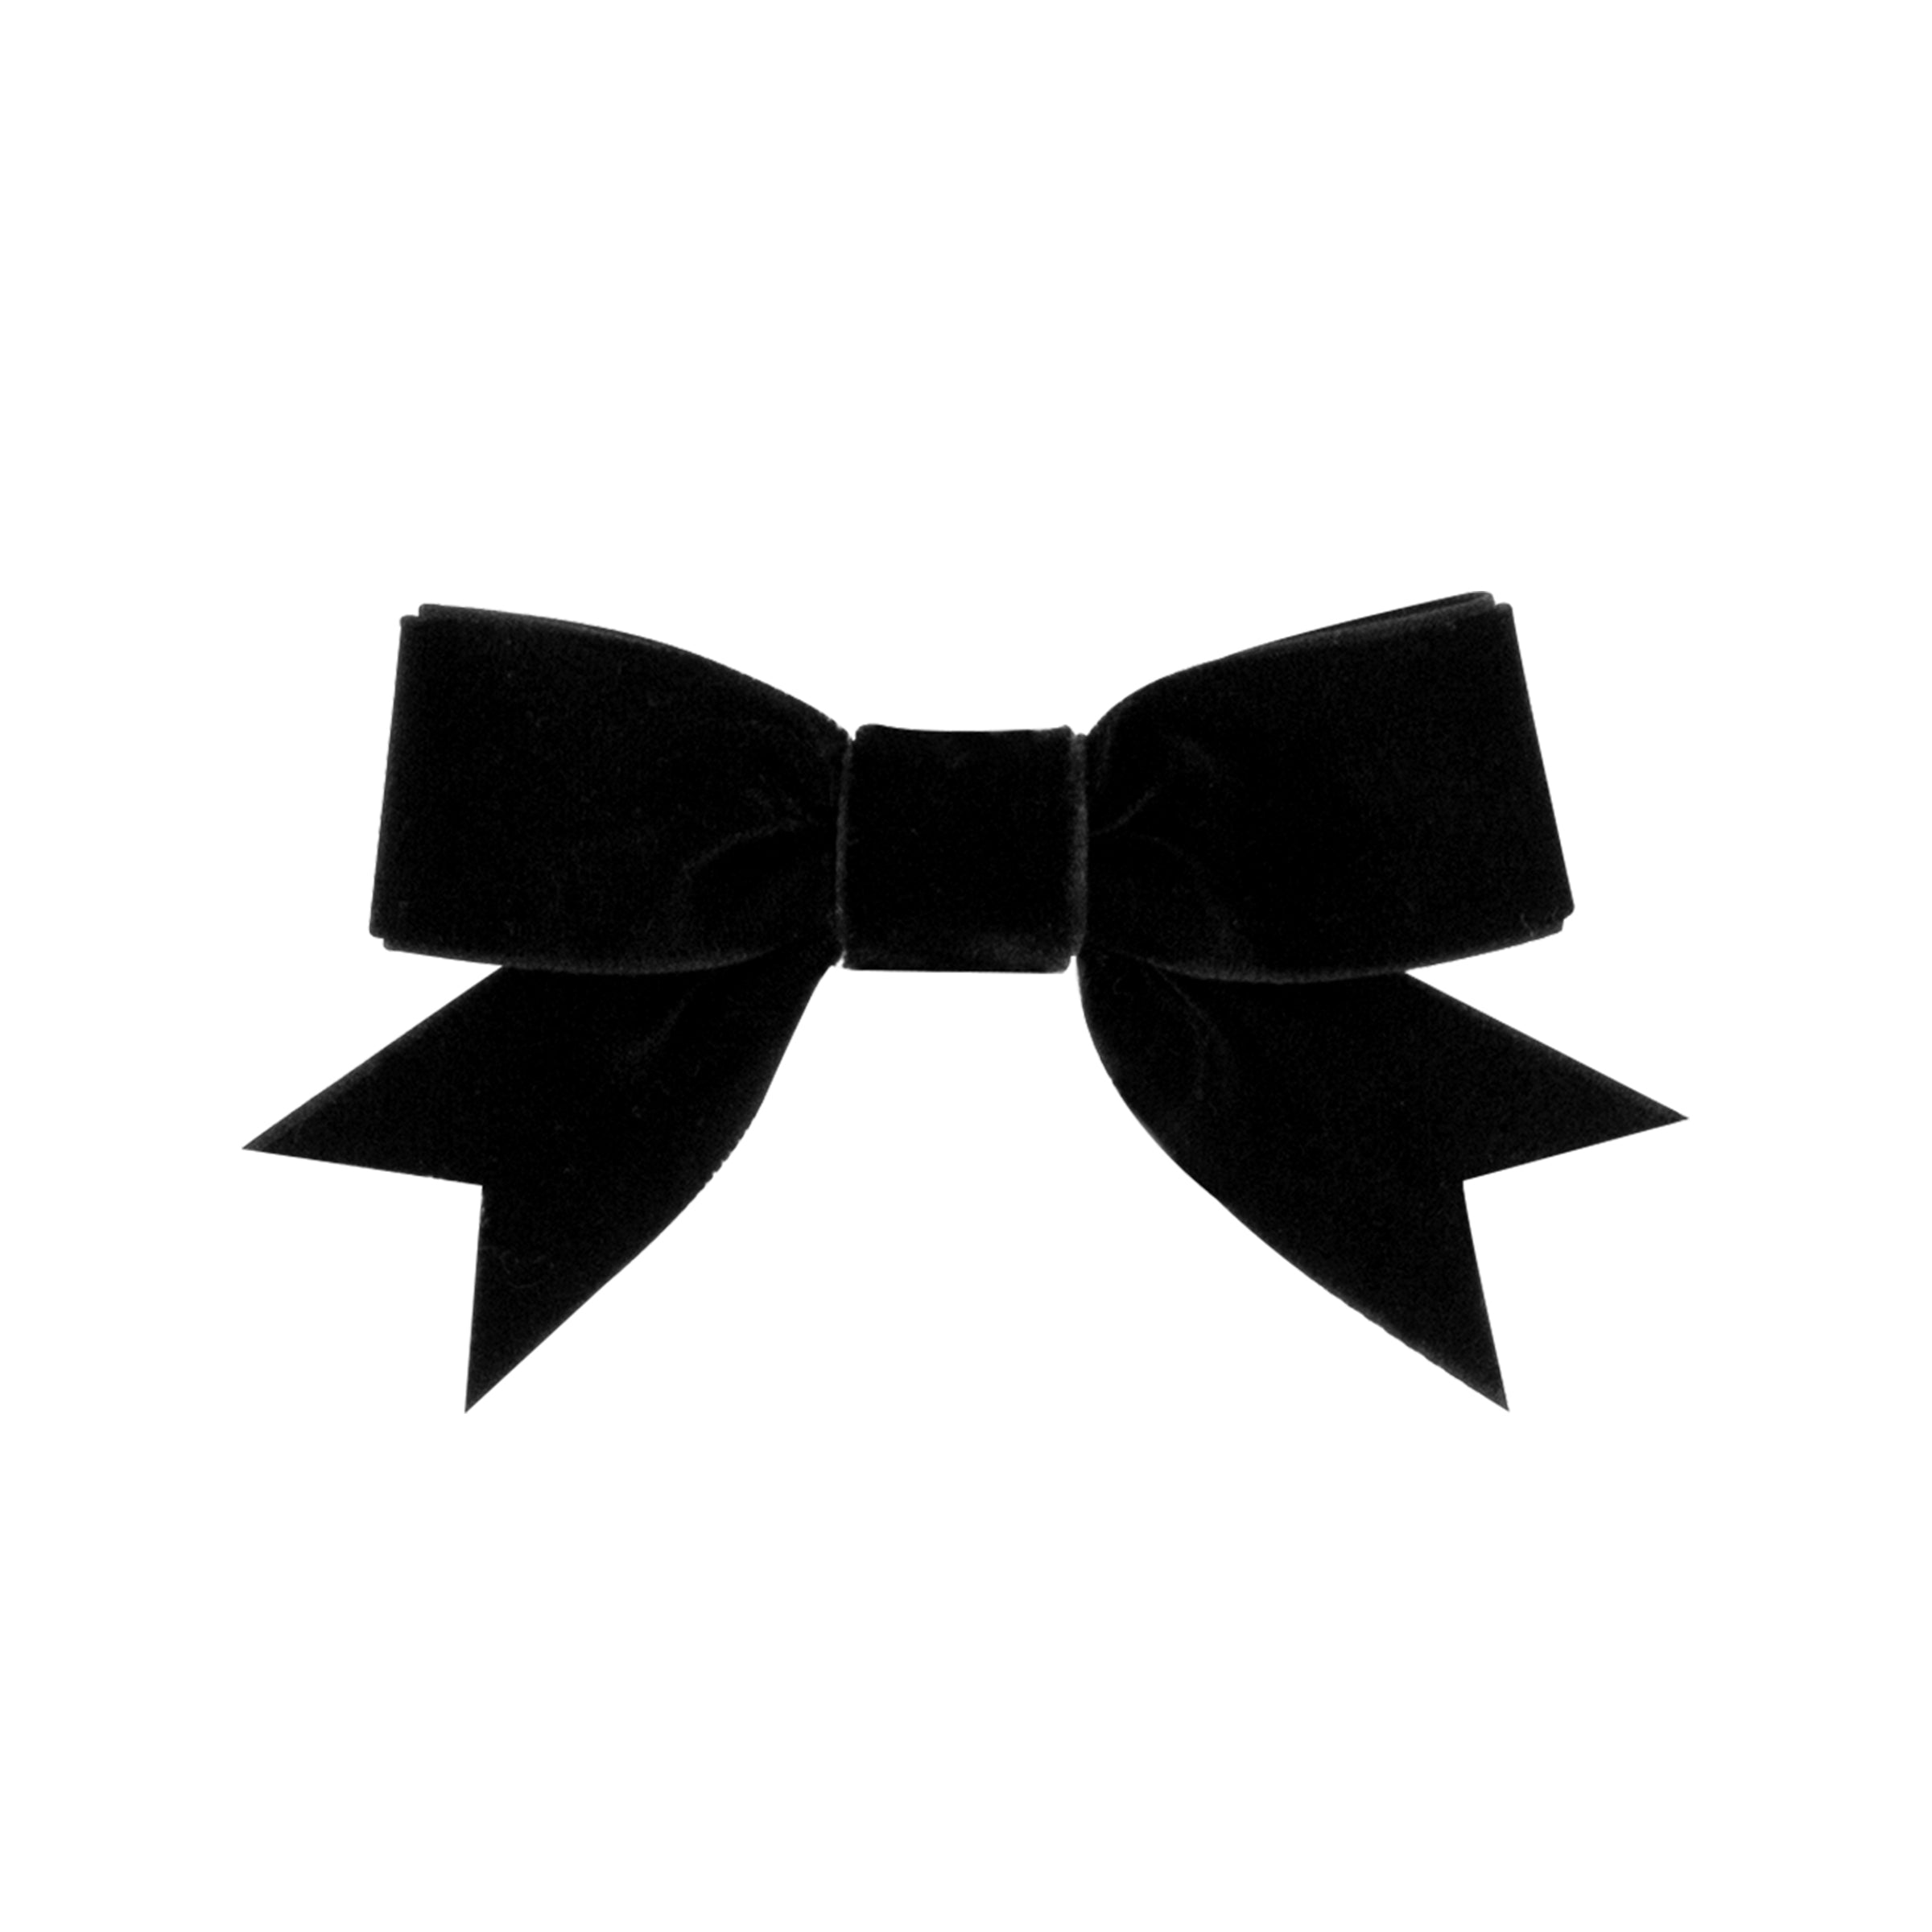 Black and White Hair Bow -  India